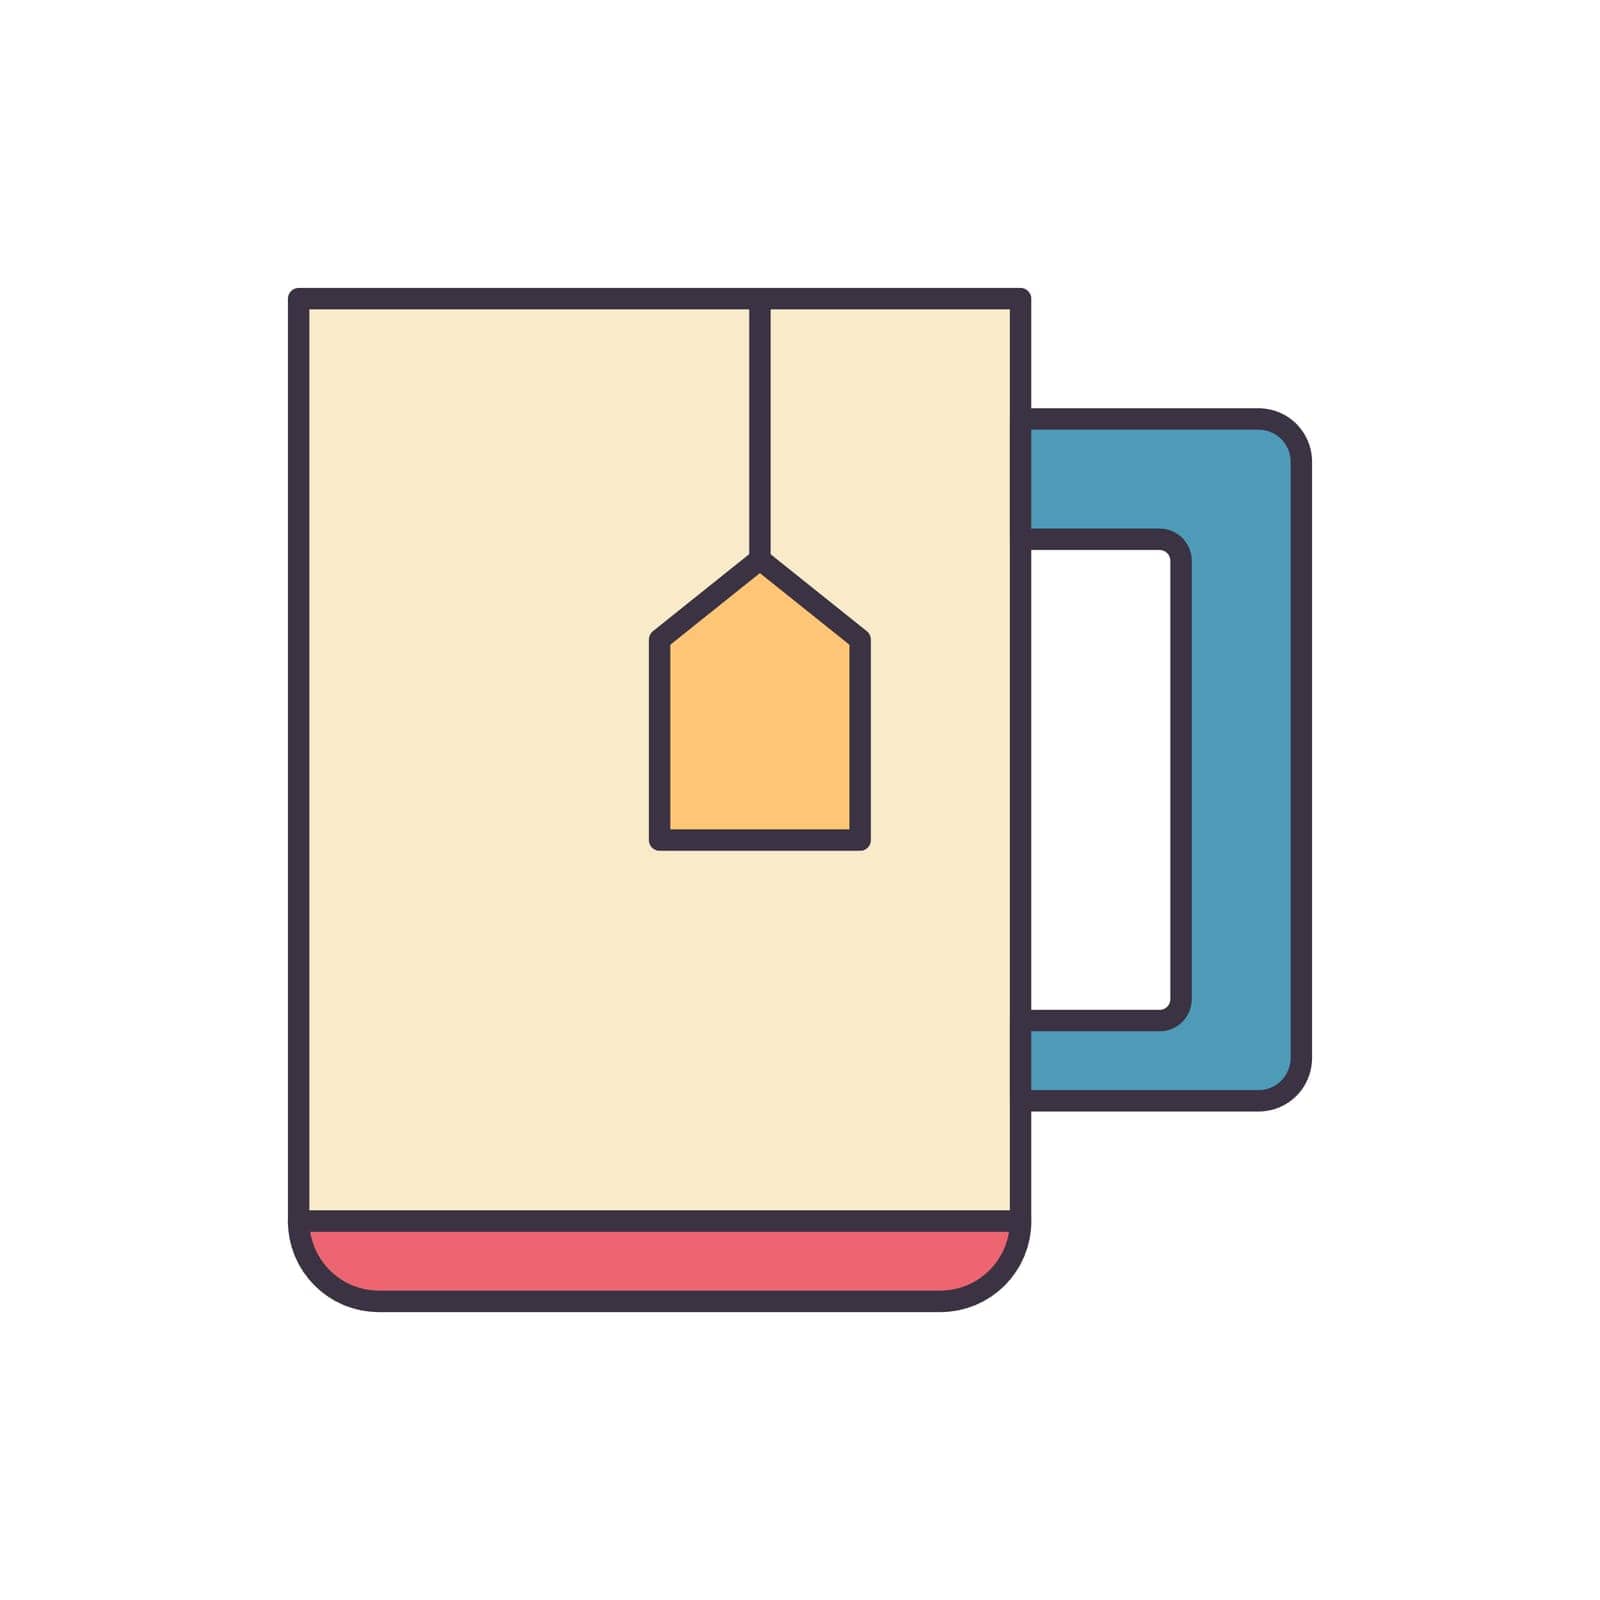 Tea Cup related vector icon by smoki